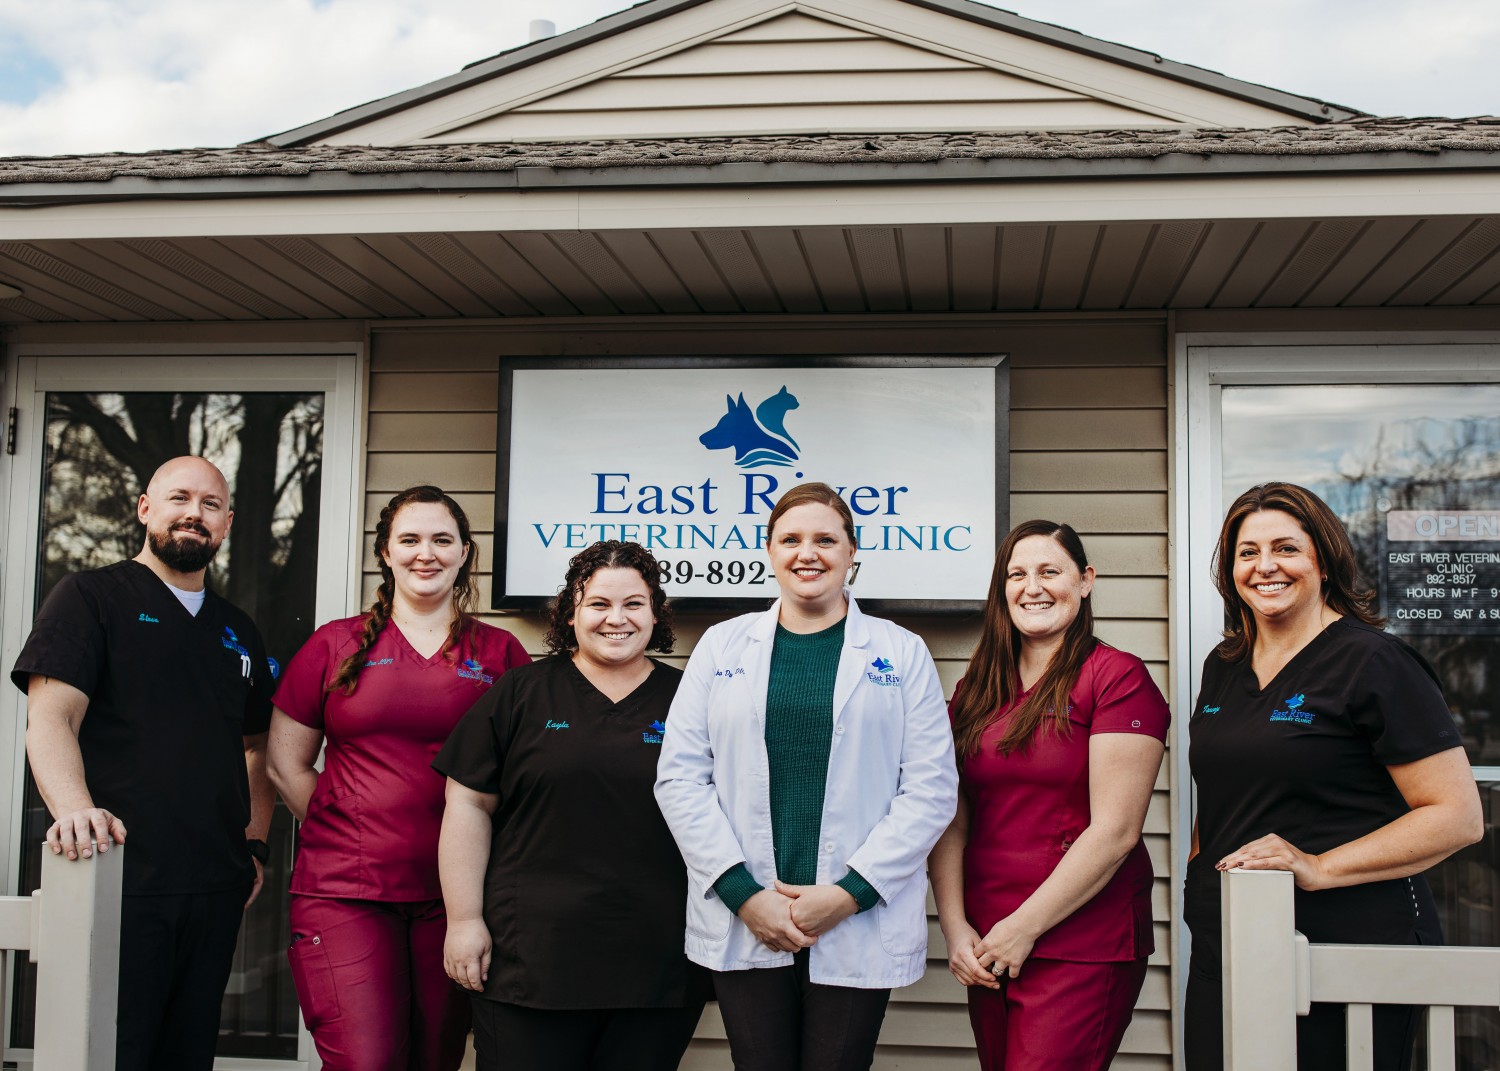 East River Veterinary Clinic staff